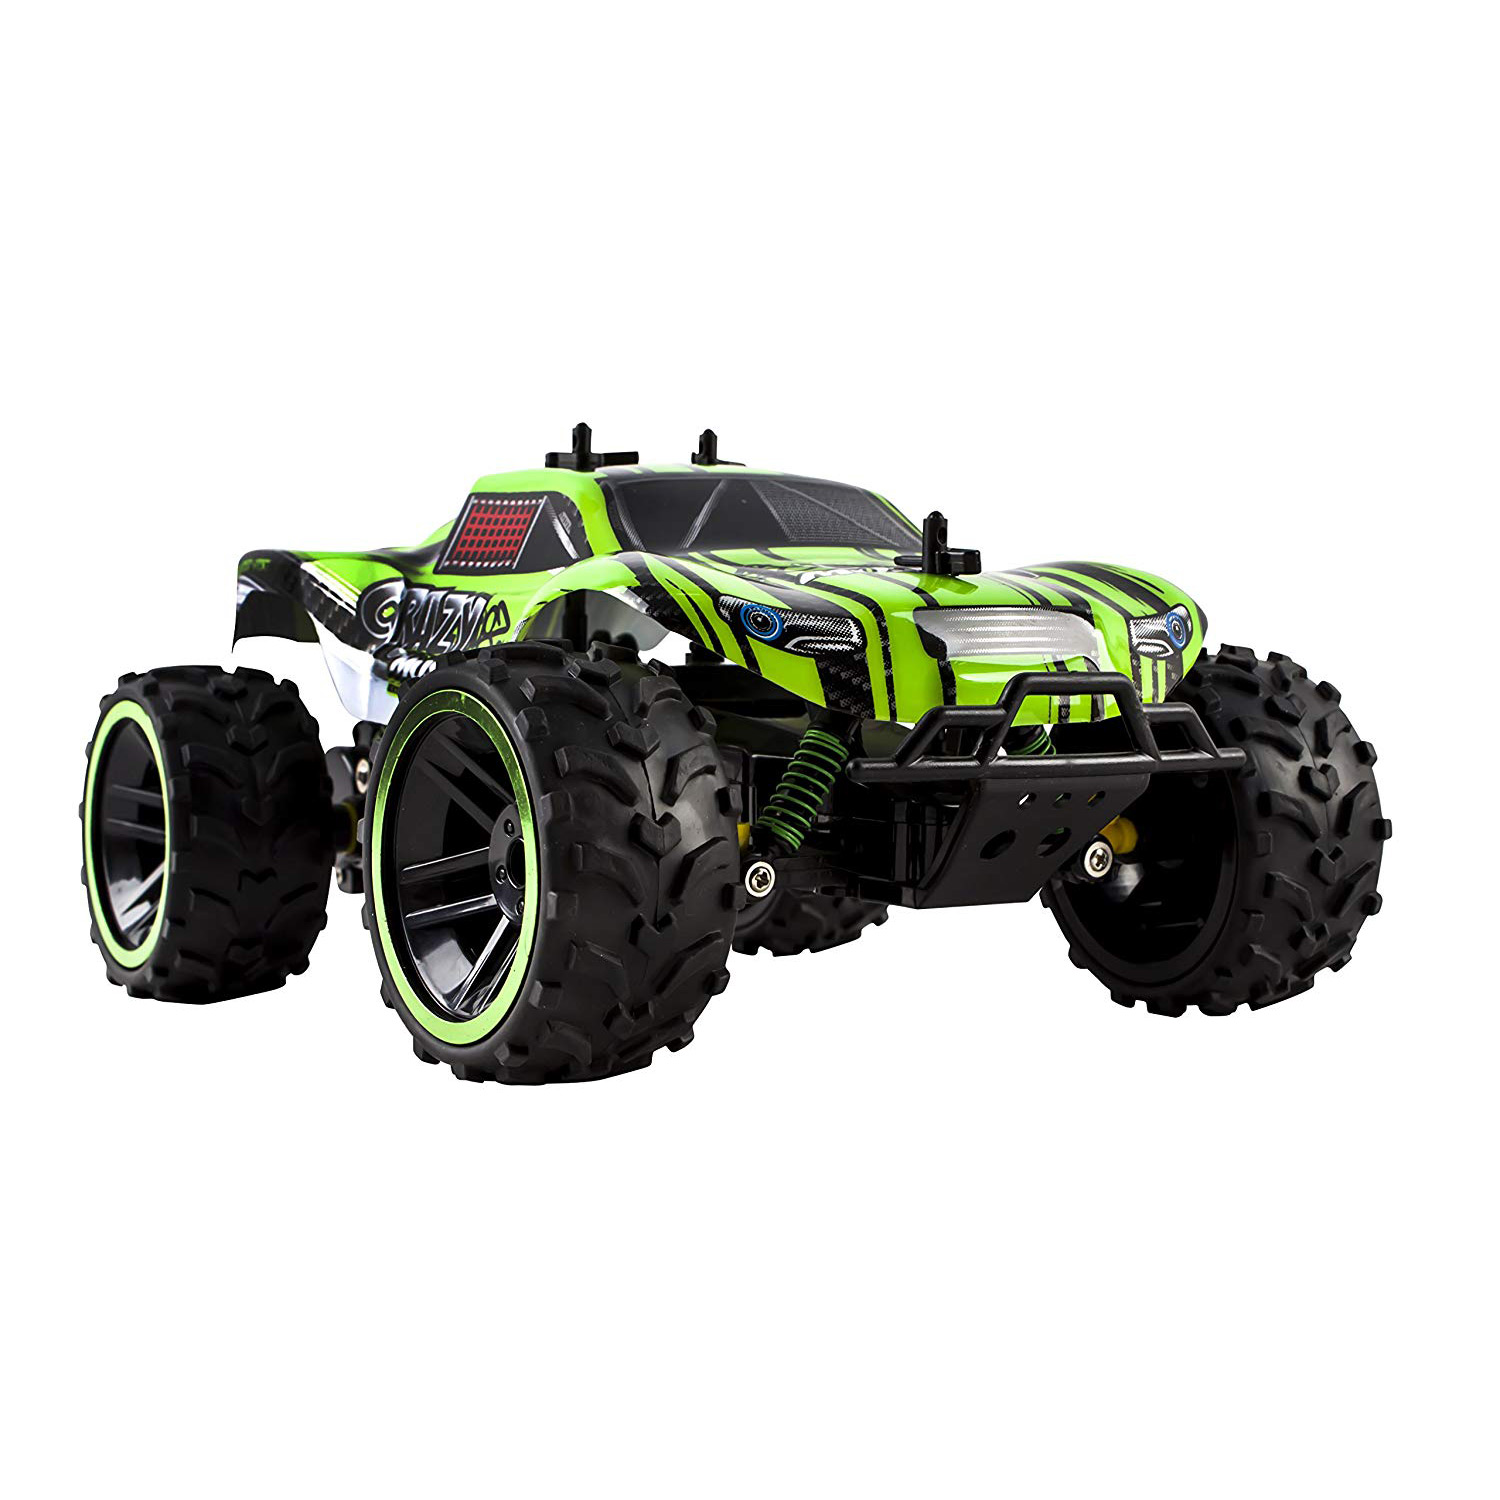 Speed Muscle RC Buggy 2.4Ghz 1:16 Scale Remote Control Truggy Ready to Run With Working Suspension And Spring Shock Absorbers for Indoor Outdoor And Off-Road Use Strong Build Toy (Green)